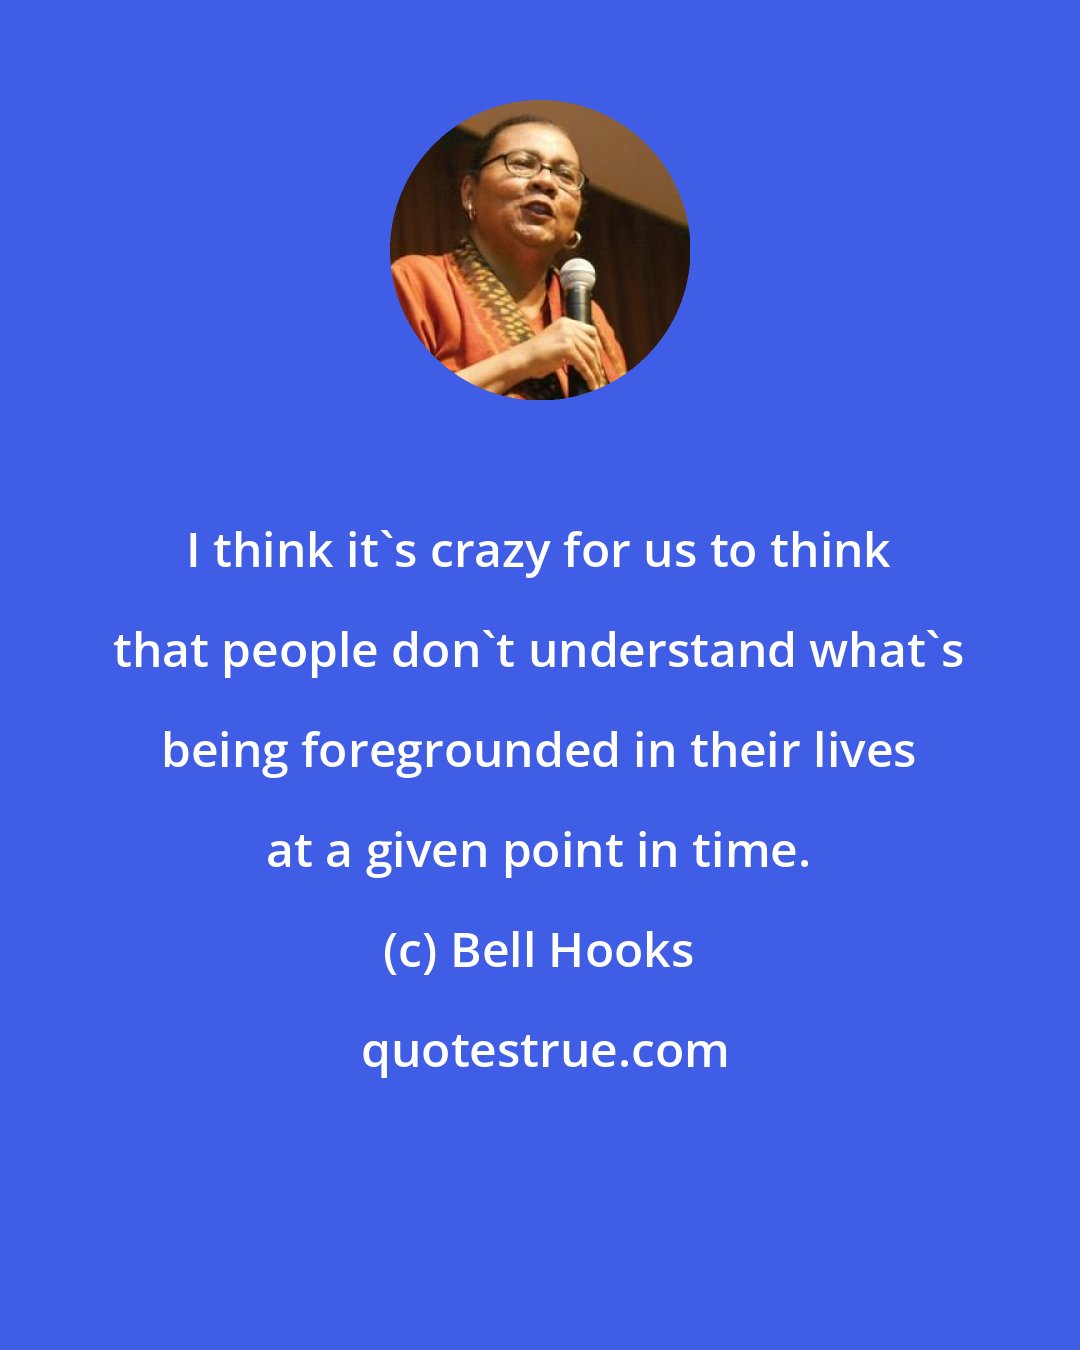 Bell Hooks: I think it's crazy for us to think that people don't understand what's being foregrounded in their lives at a given point in time.